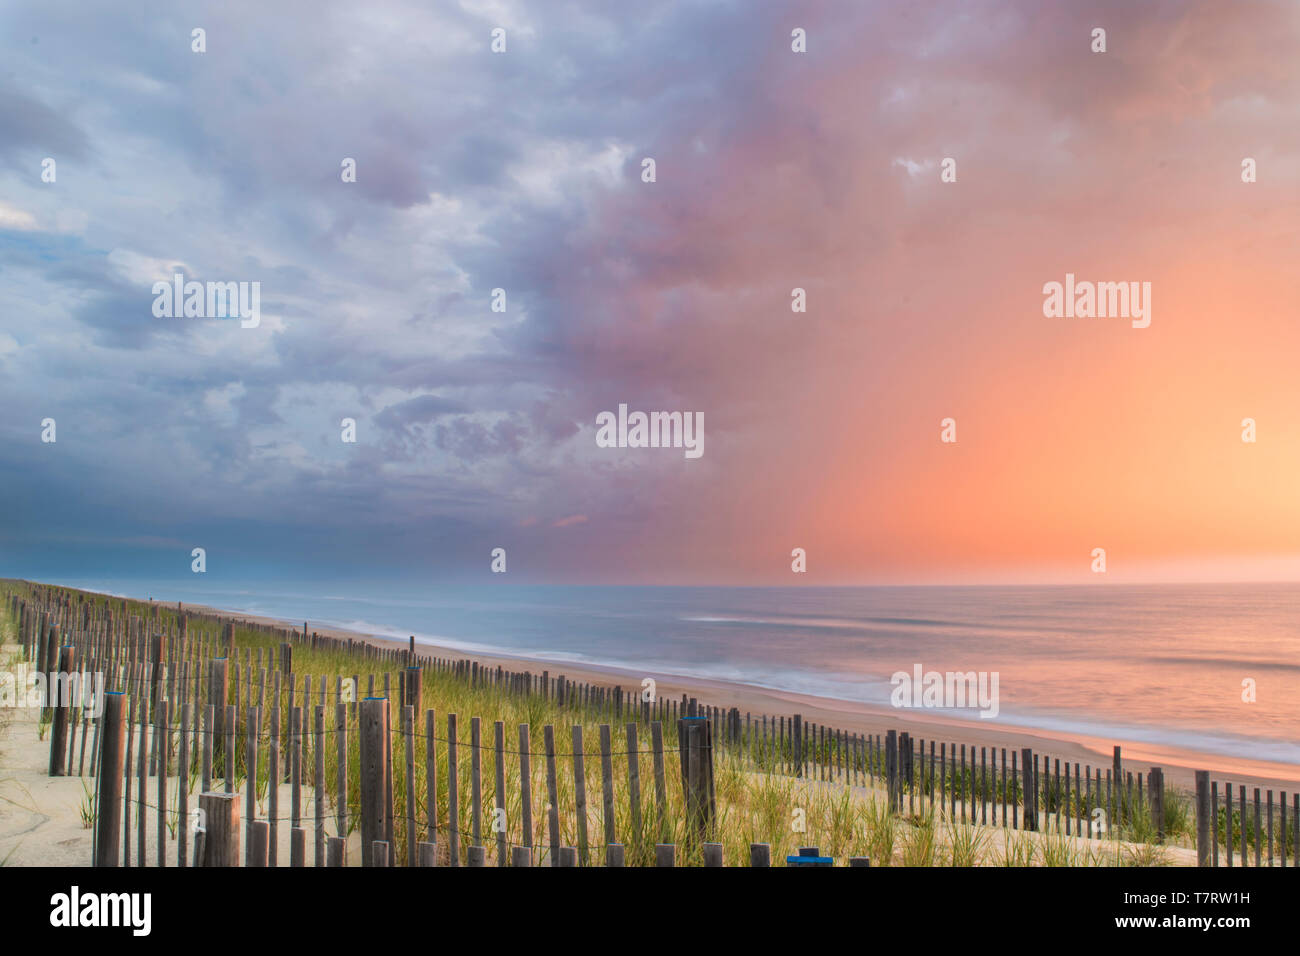 Scenic Beach Landscape during Early Morning Sunrise Stock Photo